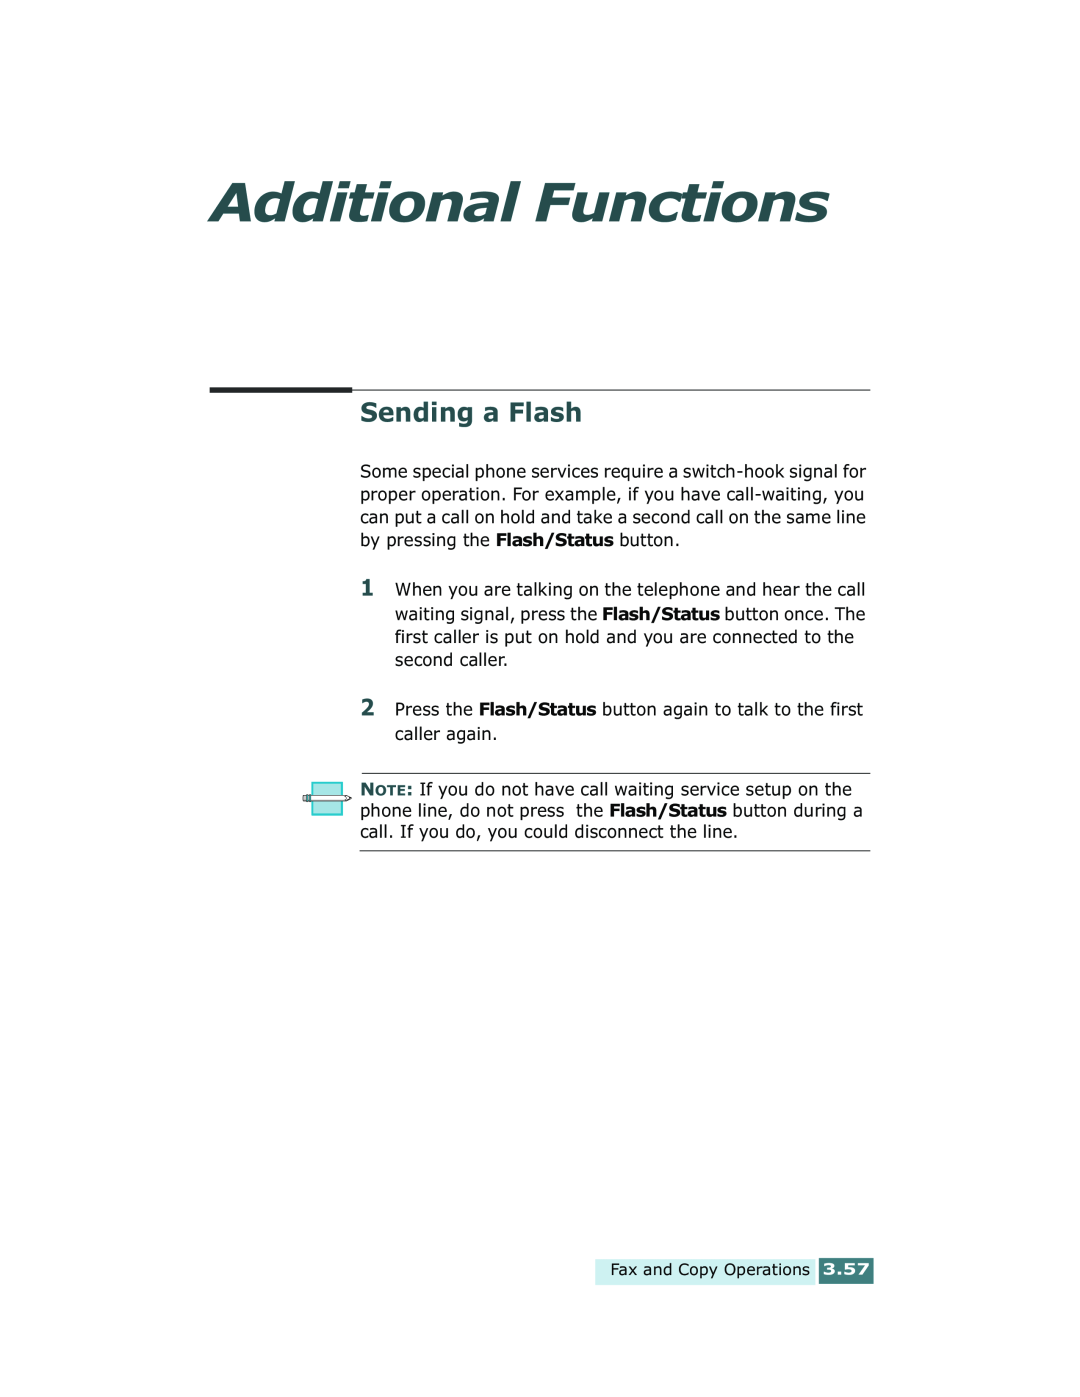 Xerox Pro 580 manual Additional Functions, Sending a Flash 